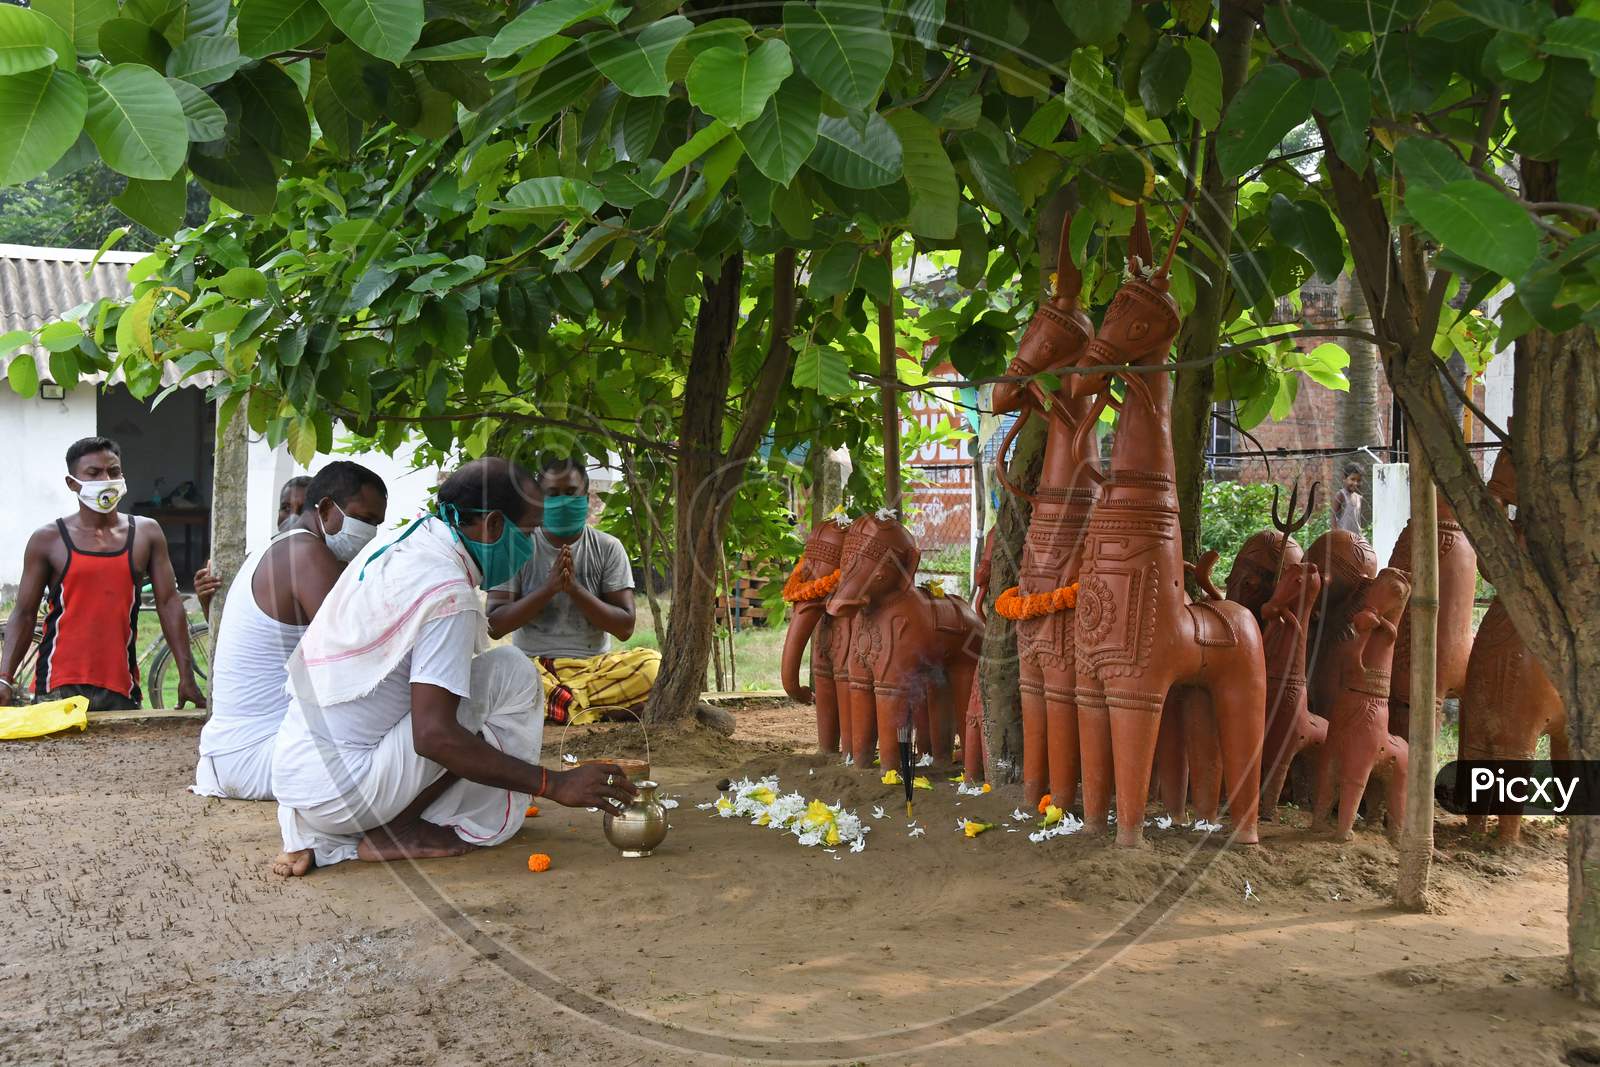 People of the Santal community prayed through religious ceremonies to save people all over the world from the COVID-19